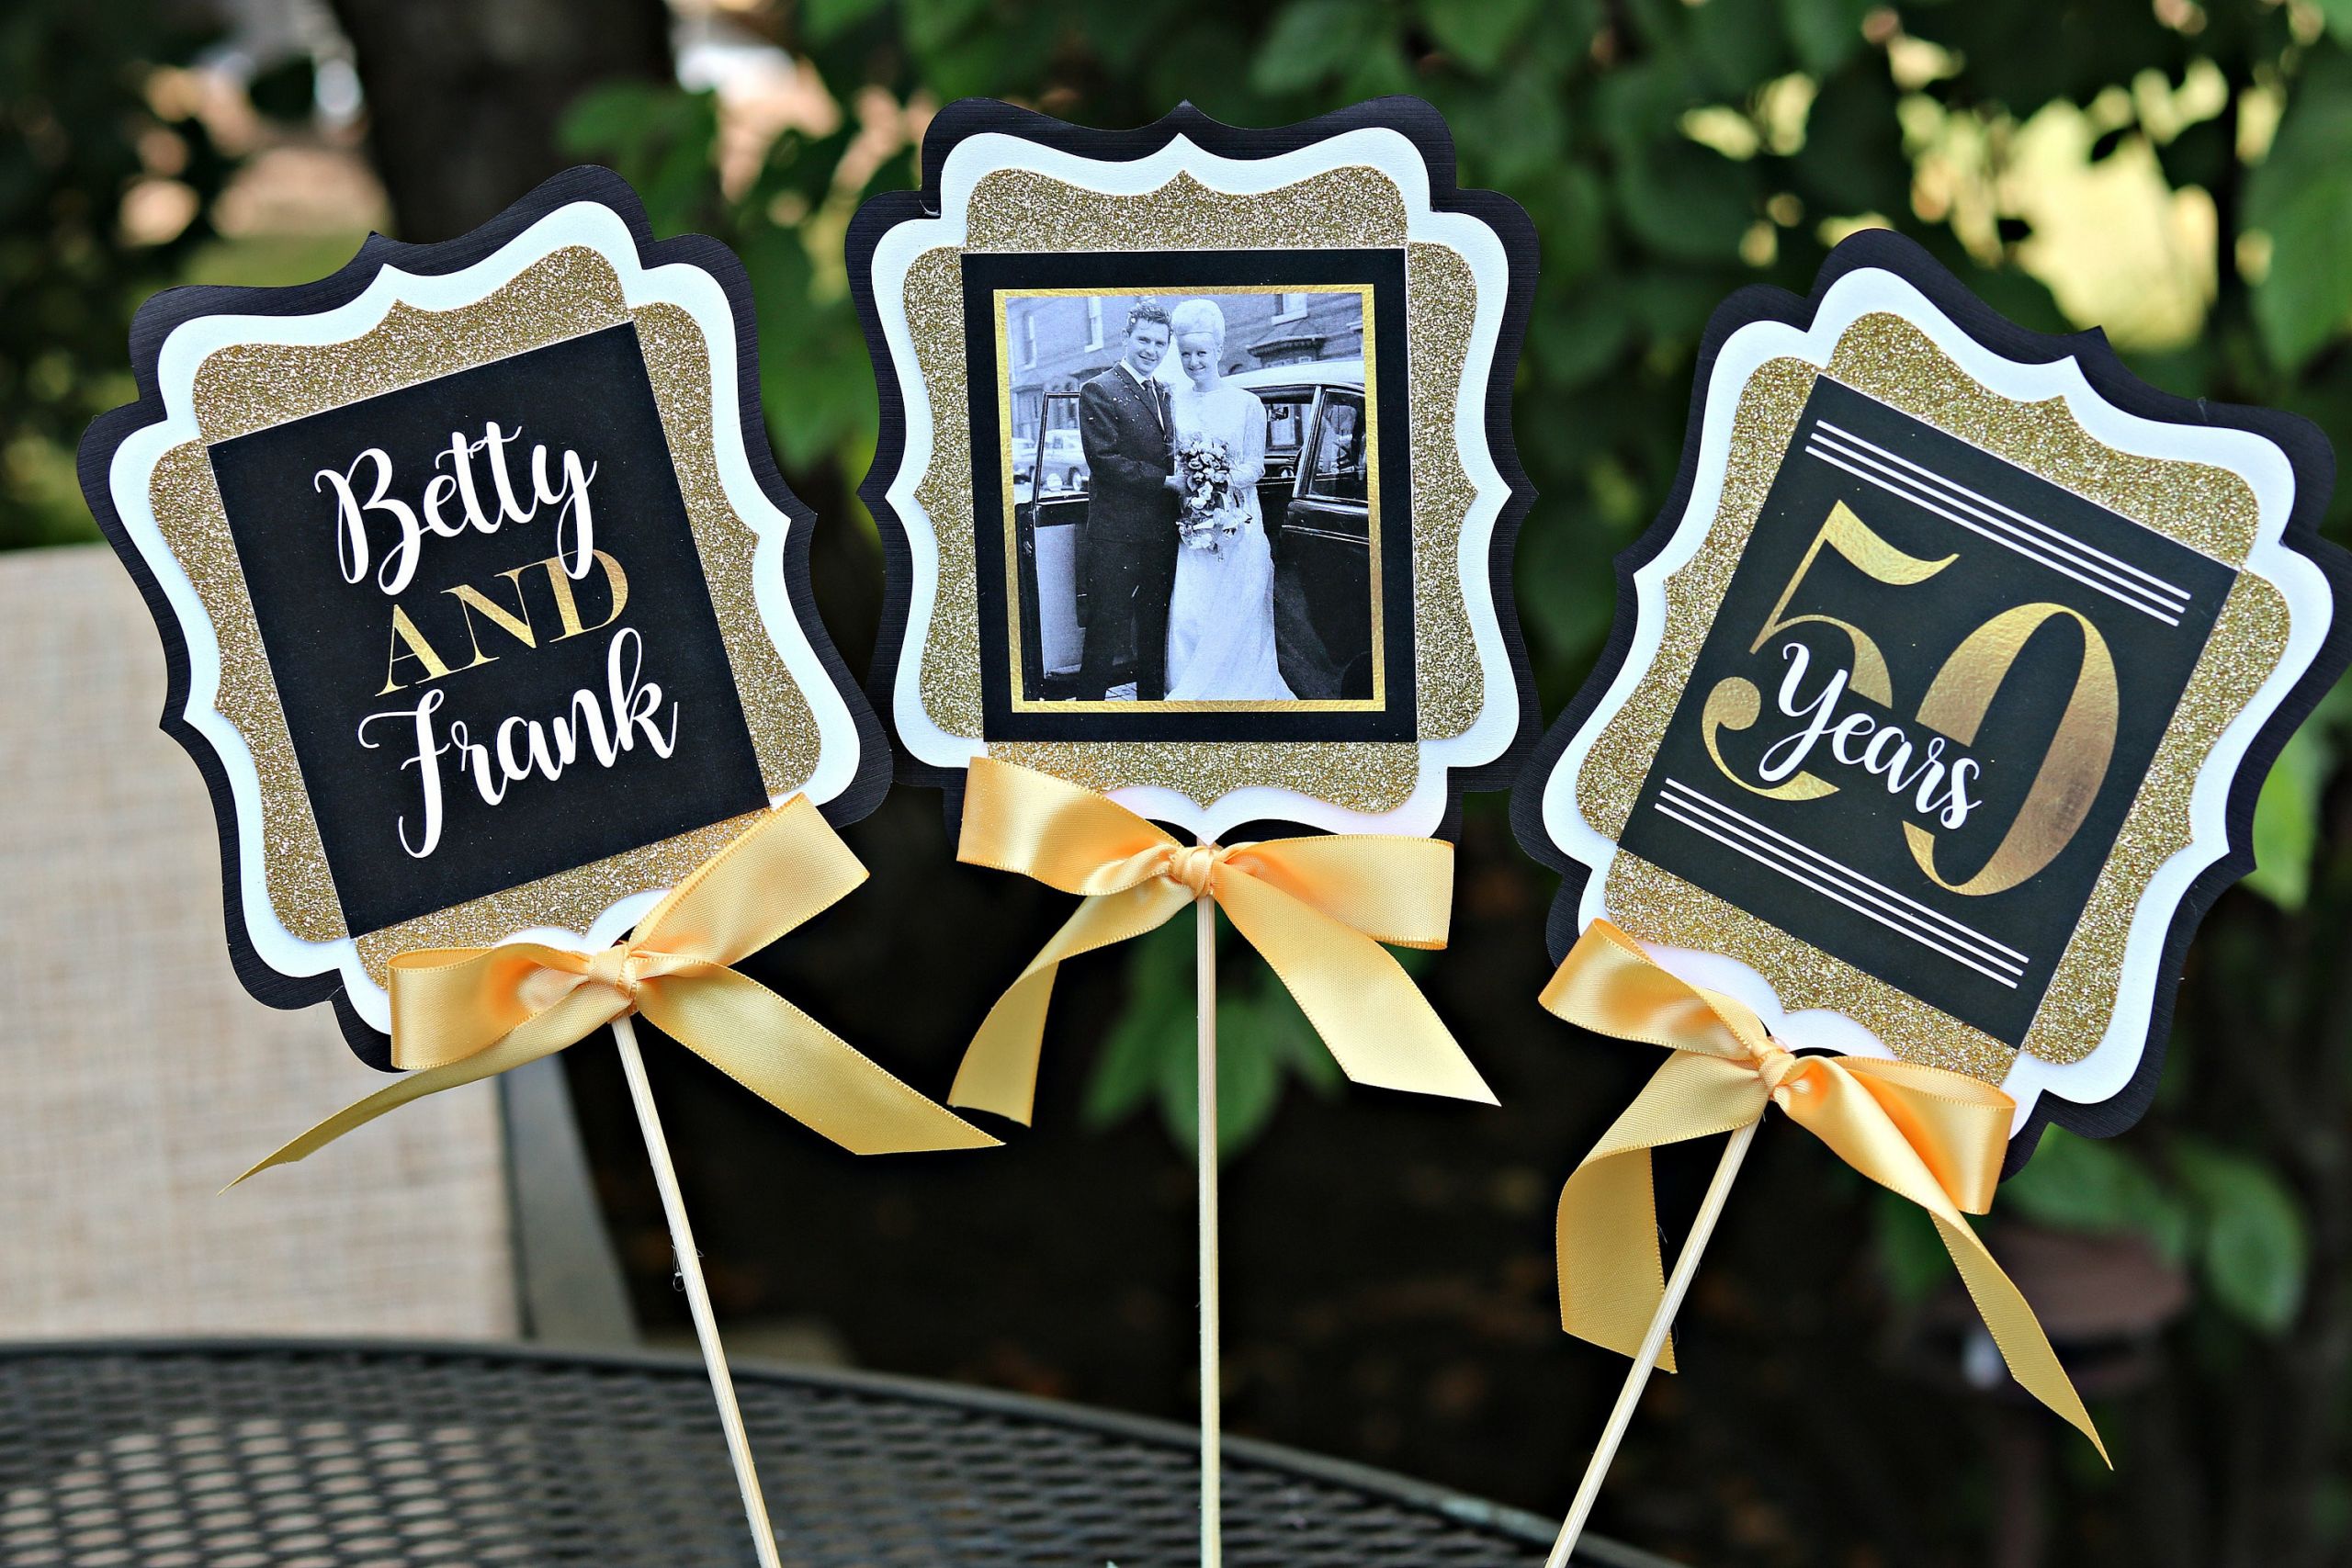 50th Wedding Anniversary Party Favors
 GOLDEN ANNIVERSARY 50th Anniversary Party Decorations